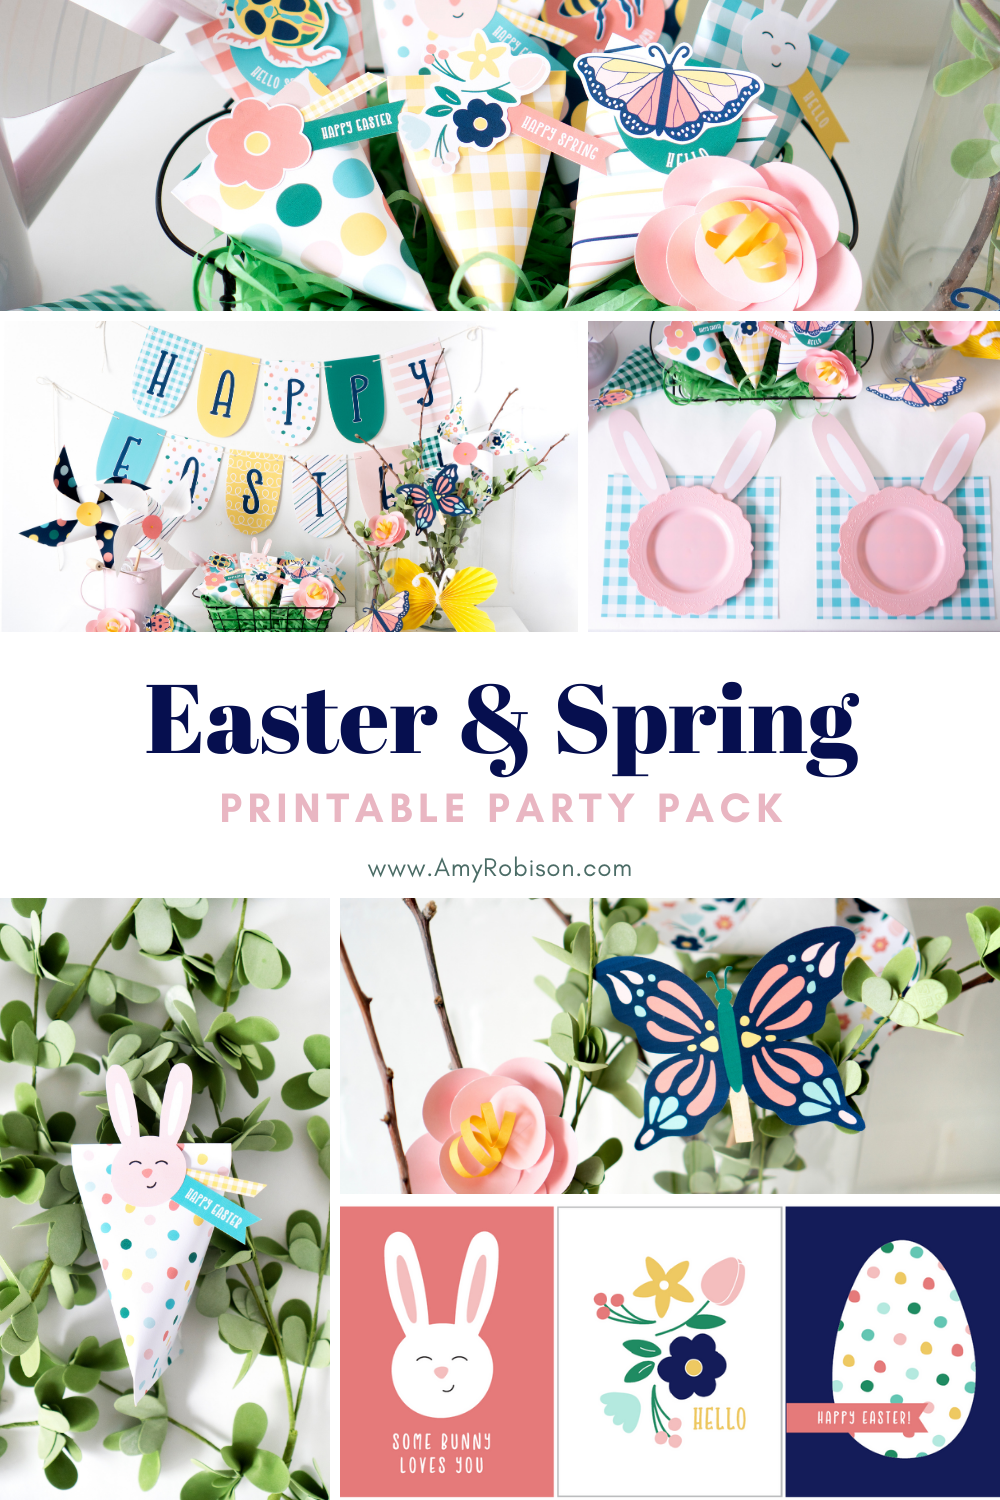 Create a cheery Easter and Spring party with printables and activity ideas from Amy Robison. Click here for more information.